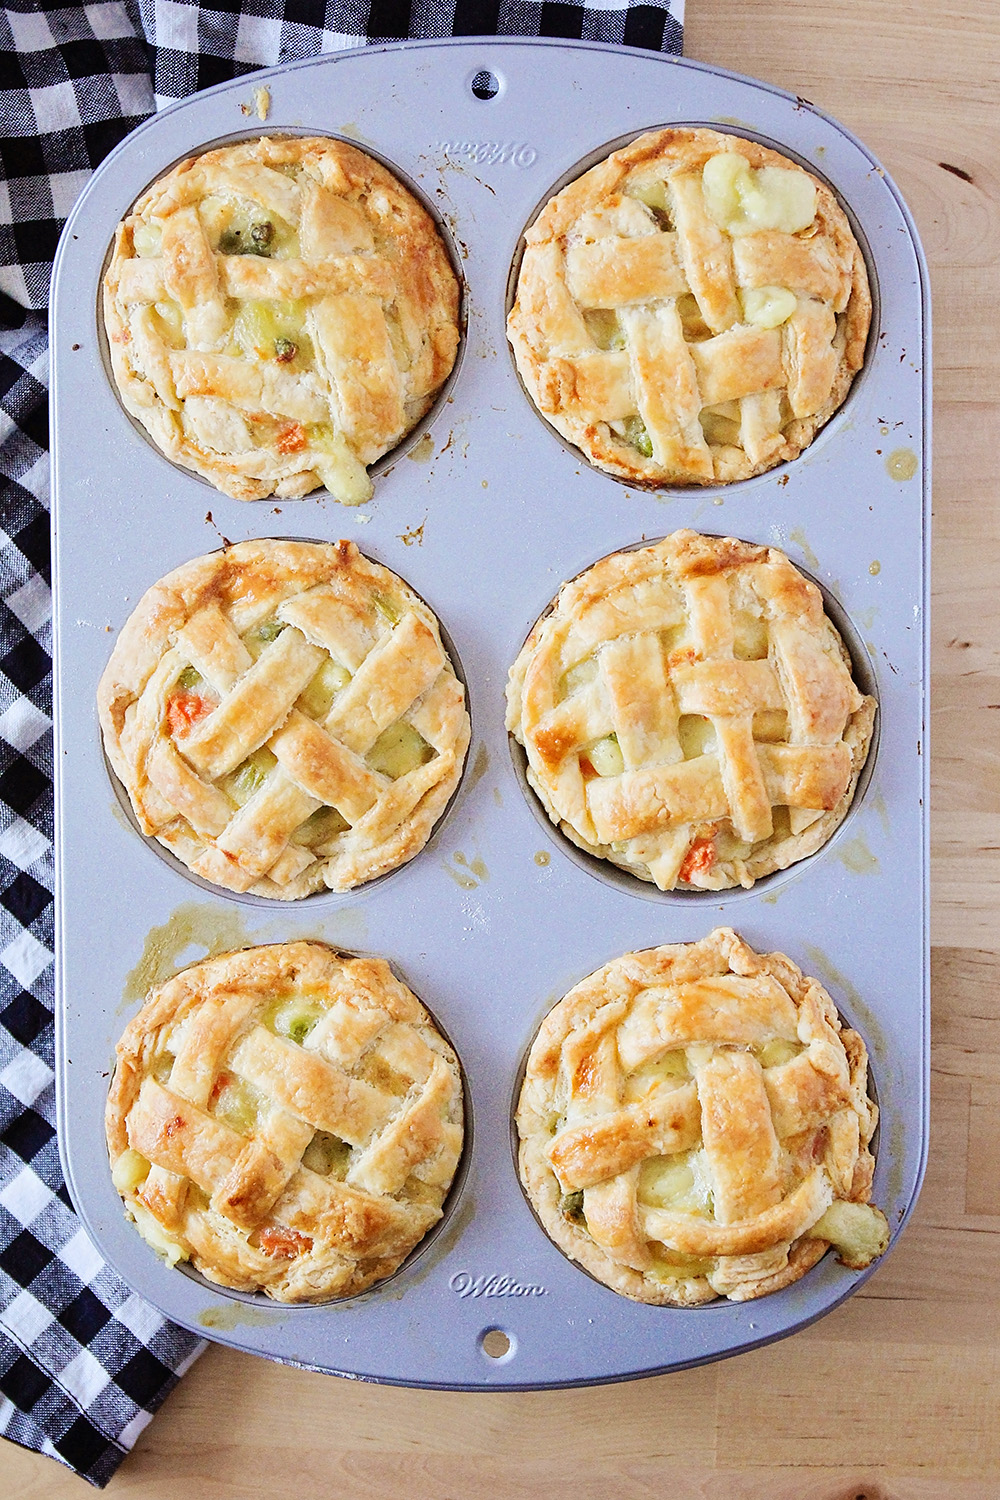 These savory mini chicken pot pies are so incredibly delicious, and adorable to boot!